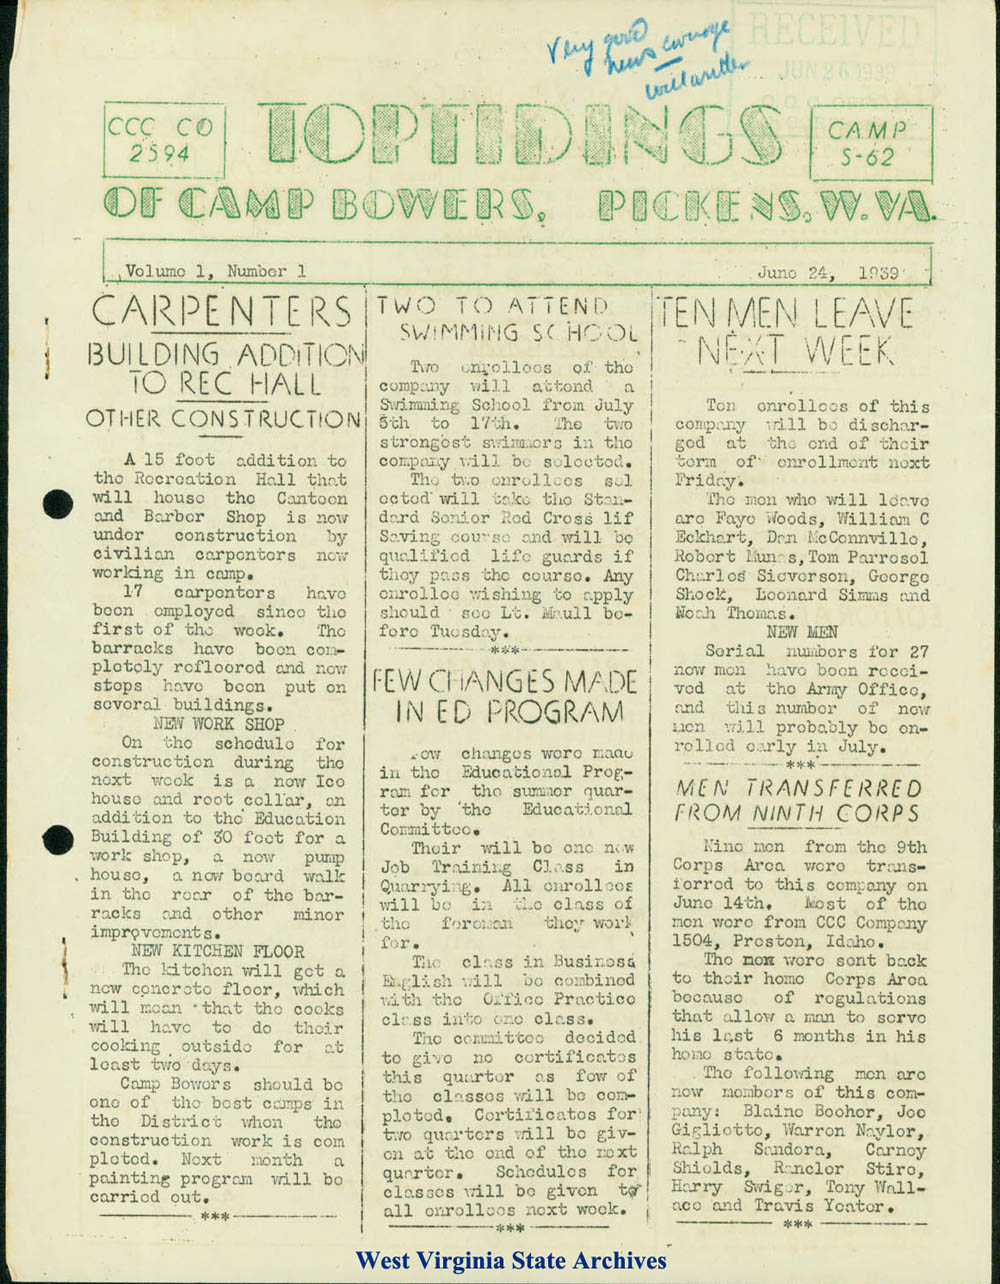 <i>Toptidings of Camp Bowers</i>, Pickens, W. Va., CCC Co. 2594, Camp S-62, Volume 1, Number 1, featuring news and events, 1939 (Ms85-17, CCC Collection, 1939)